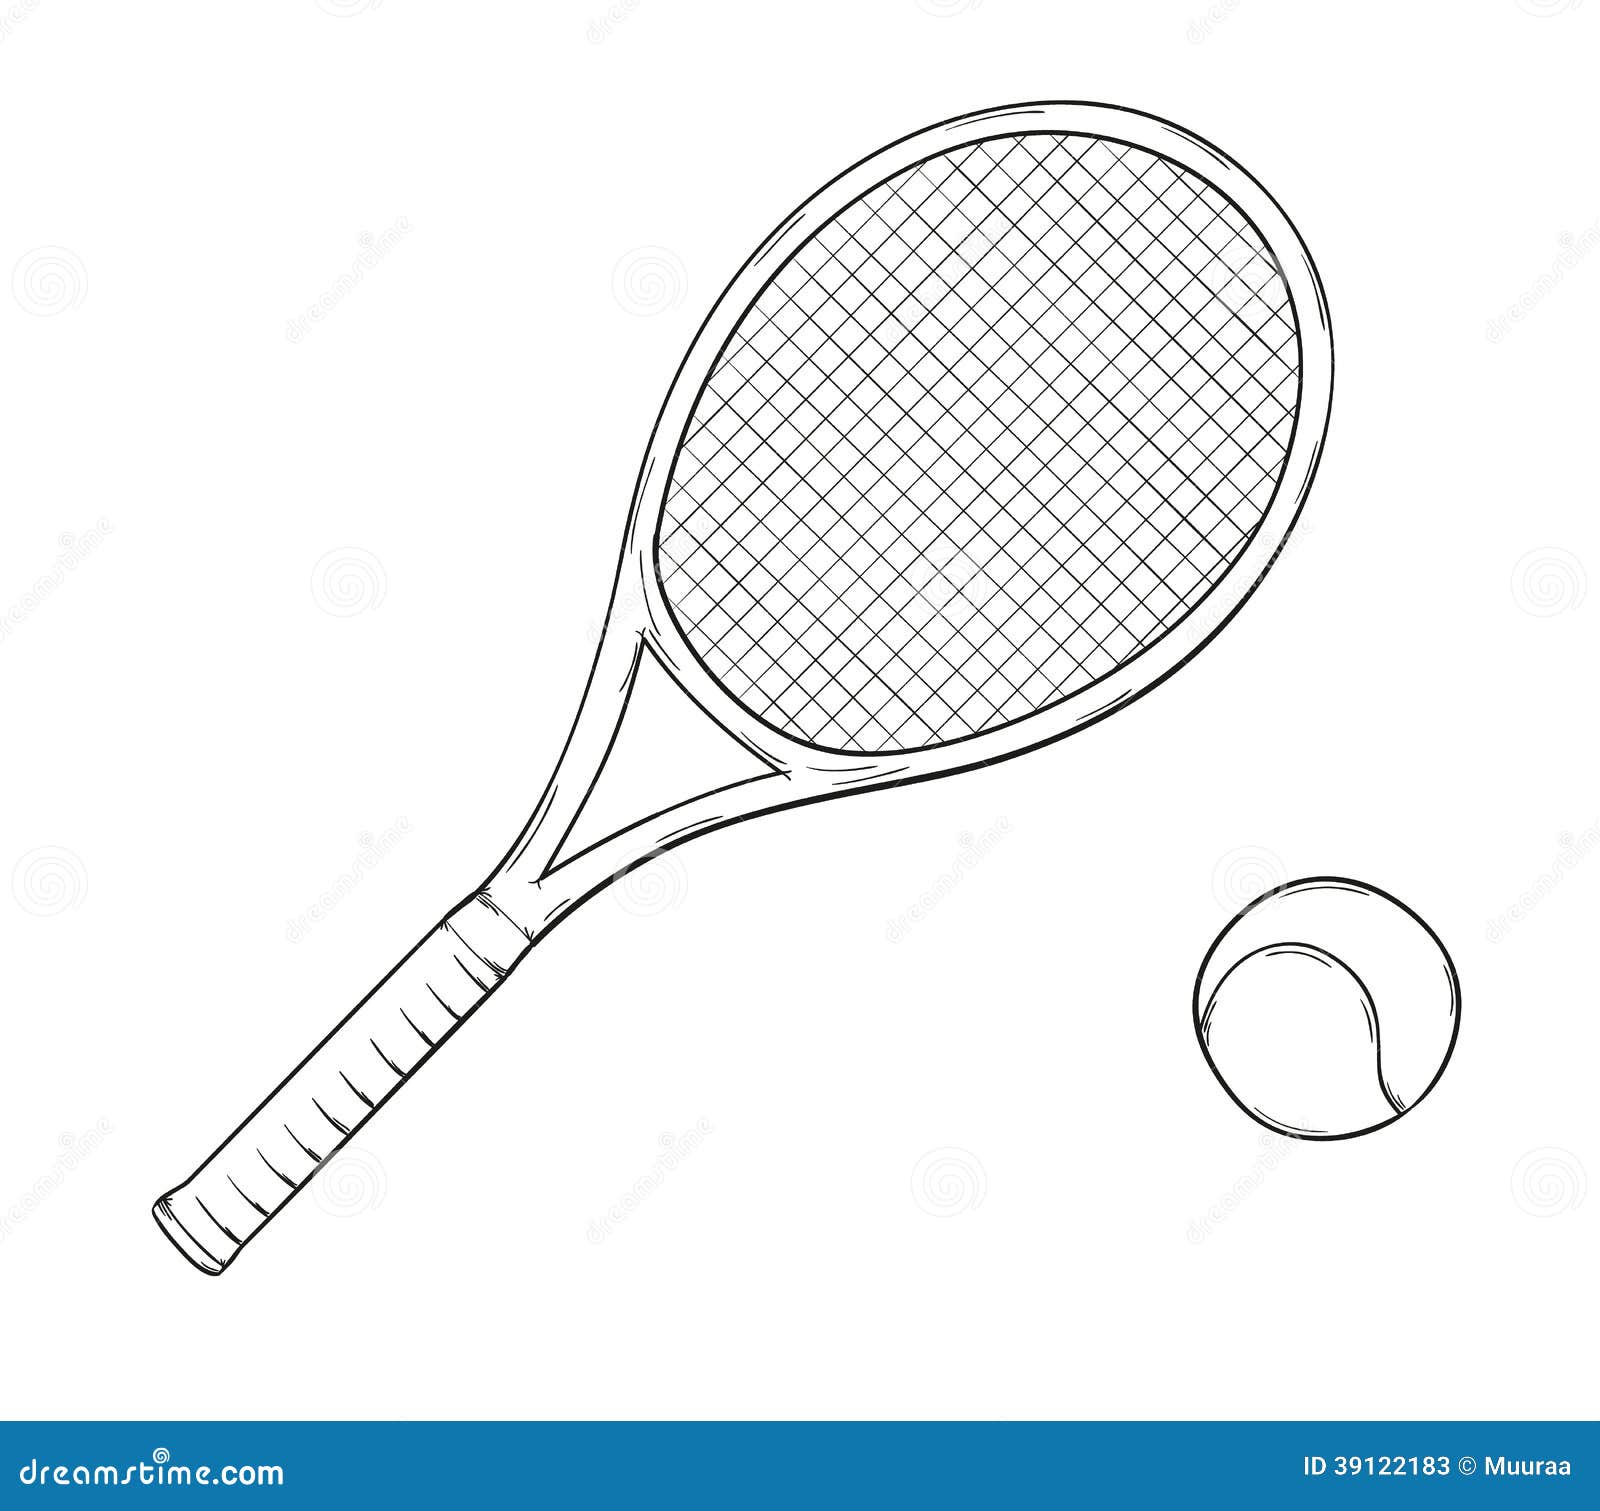 Tennis racket stock vector. Image of drawn, drawn, competitive - 39122183